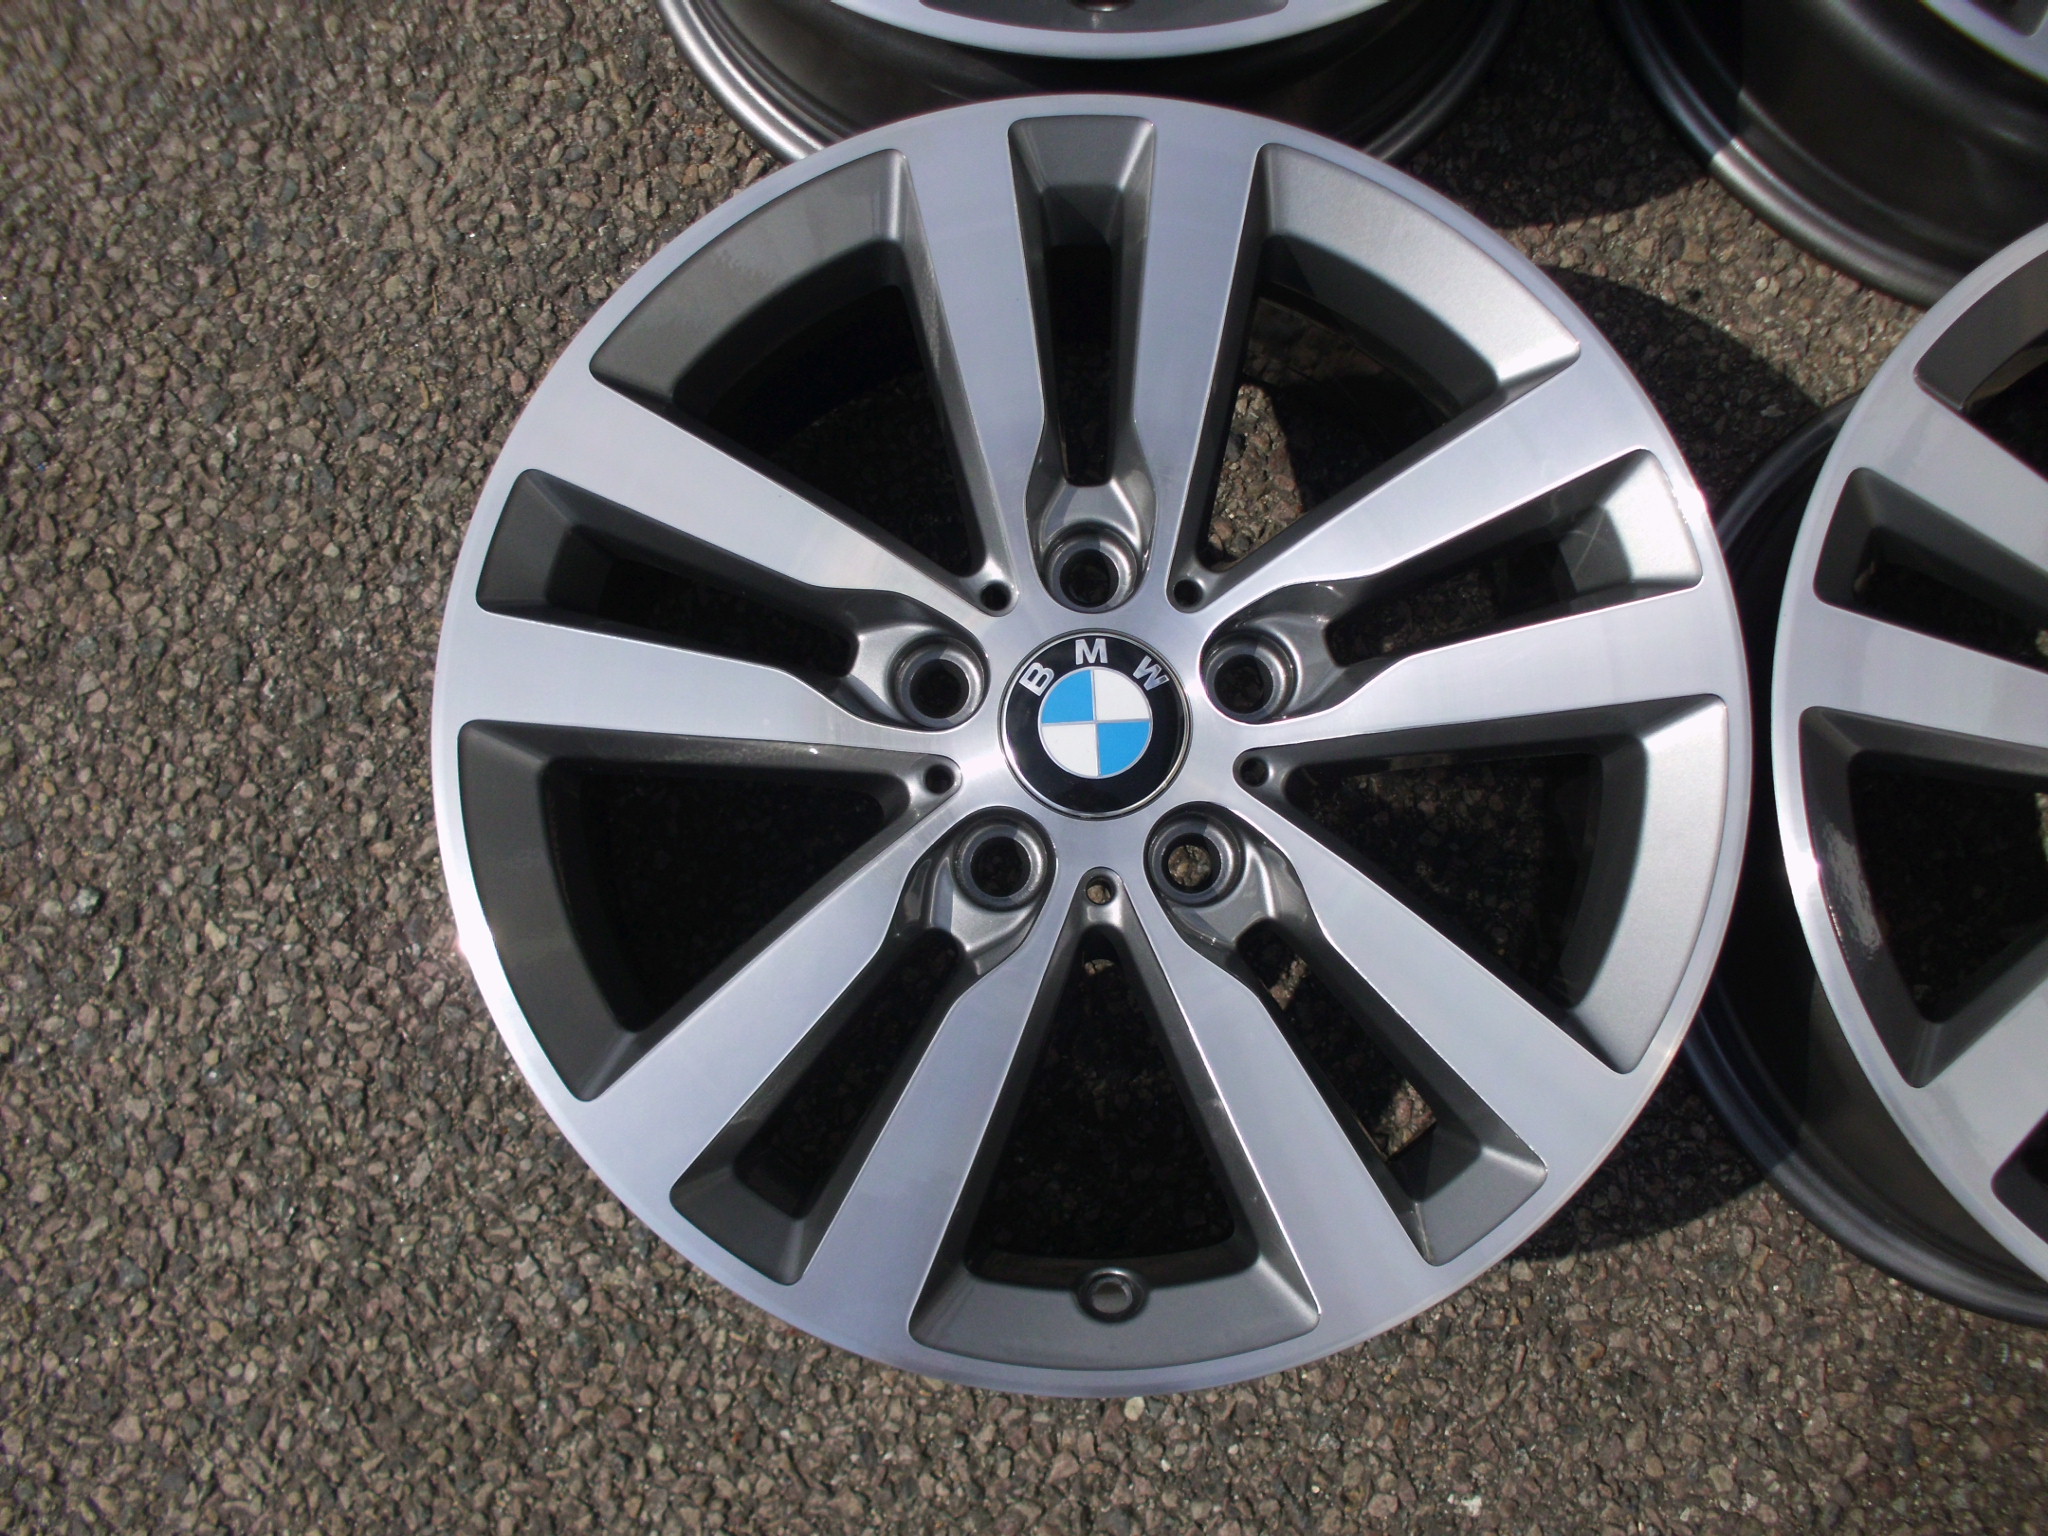 USED 17" GENUINE BMW STYLE 655 DOUBLE SPOKE ALLOY WHEELS, FULLY REFURBISHED, IN GUNMETAL WITH POLISHED FACE